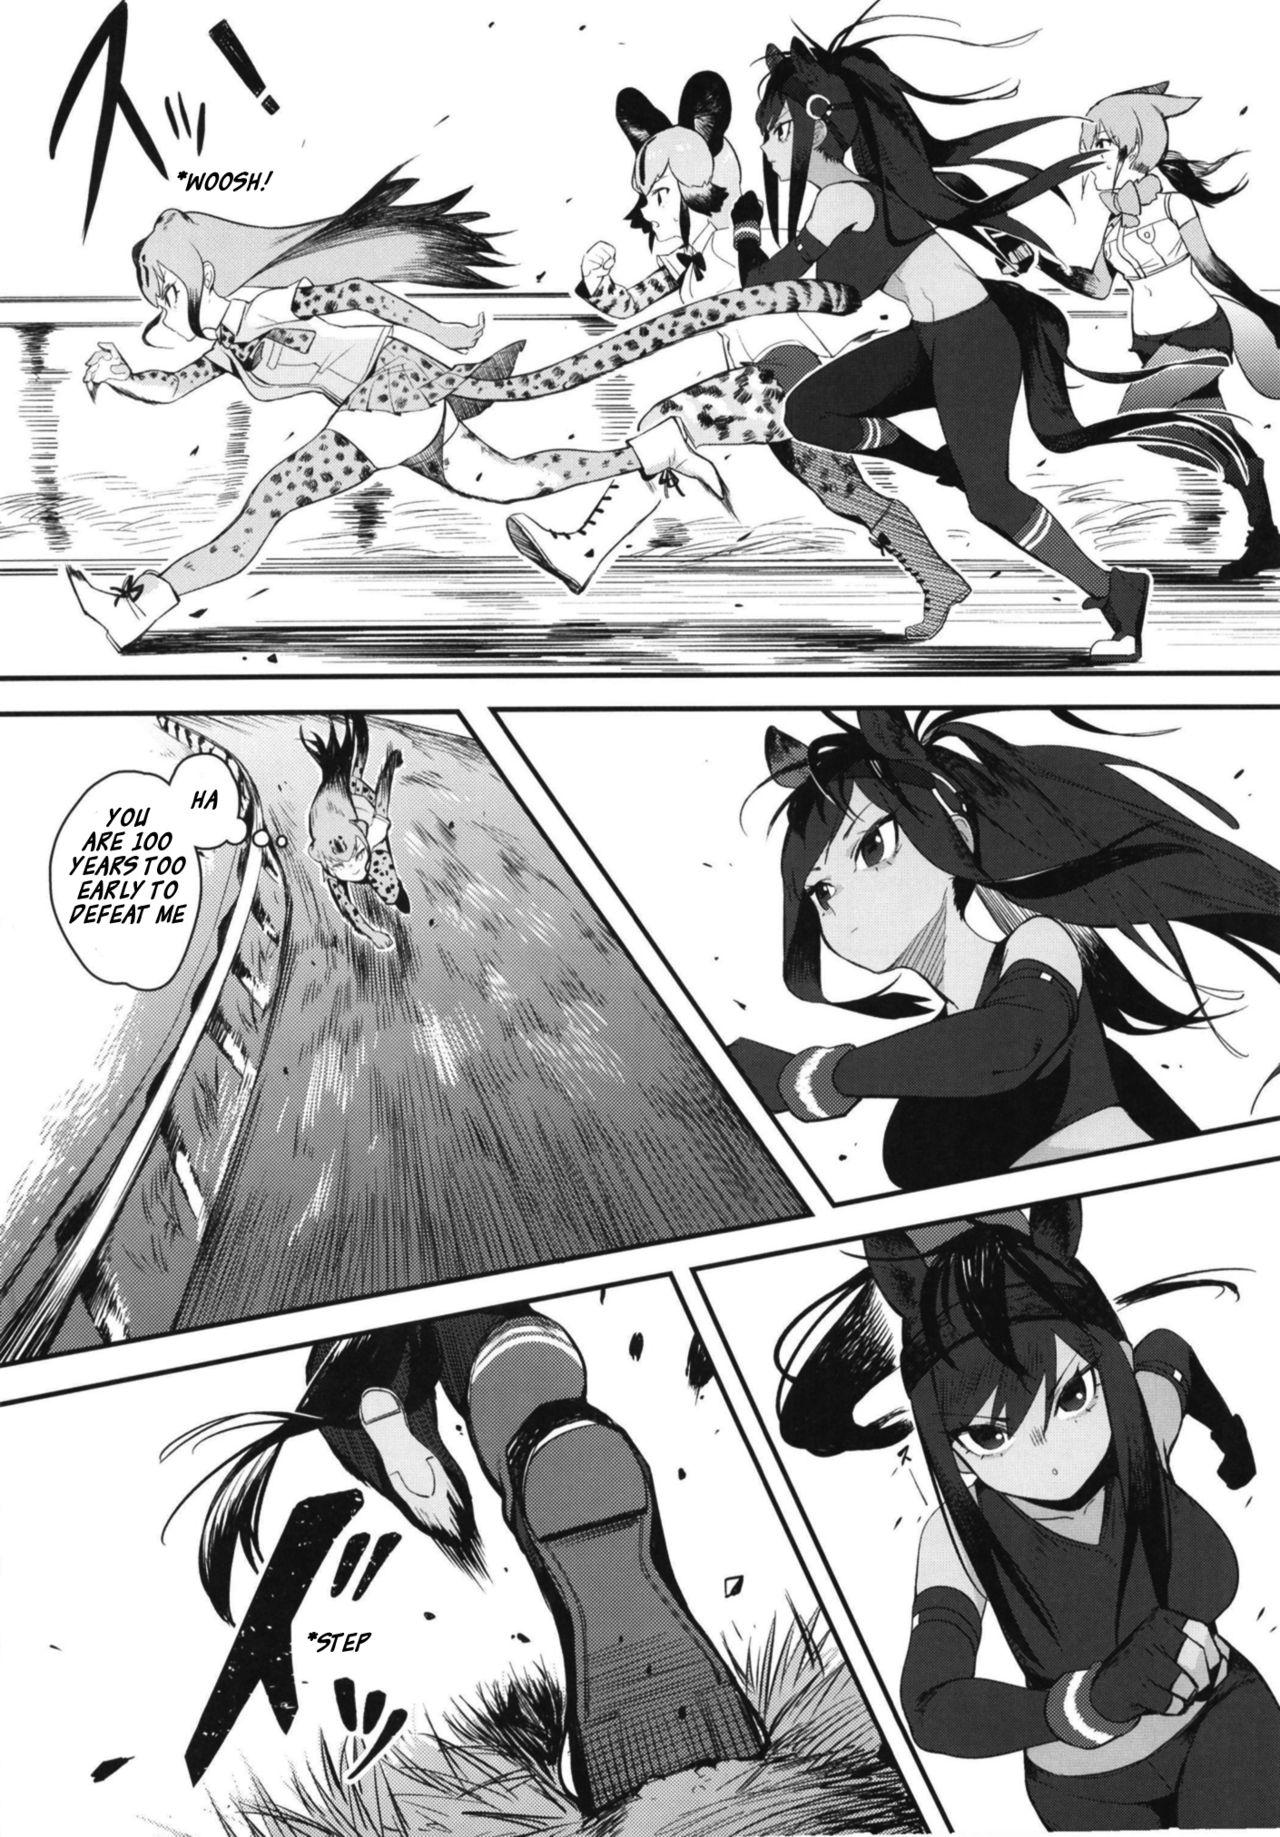 Lezdom Thoroughbred Early Days 2 - Kemono friends Free Hard Core Porn - Page 4